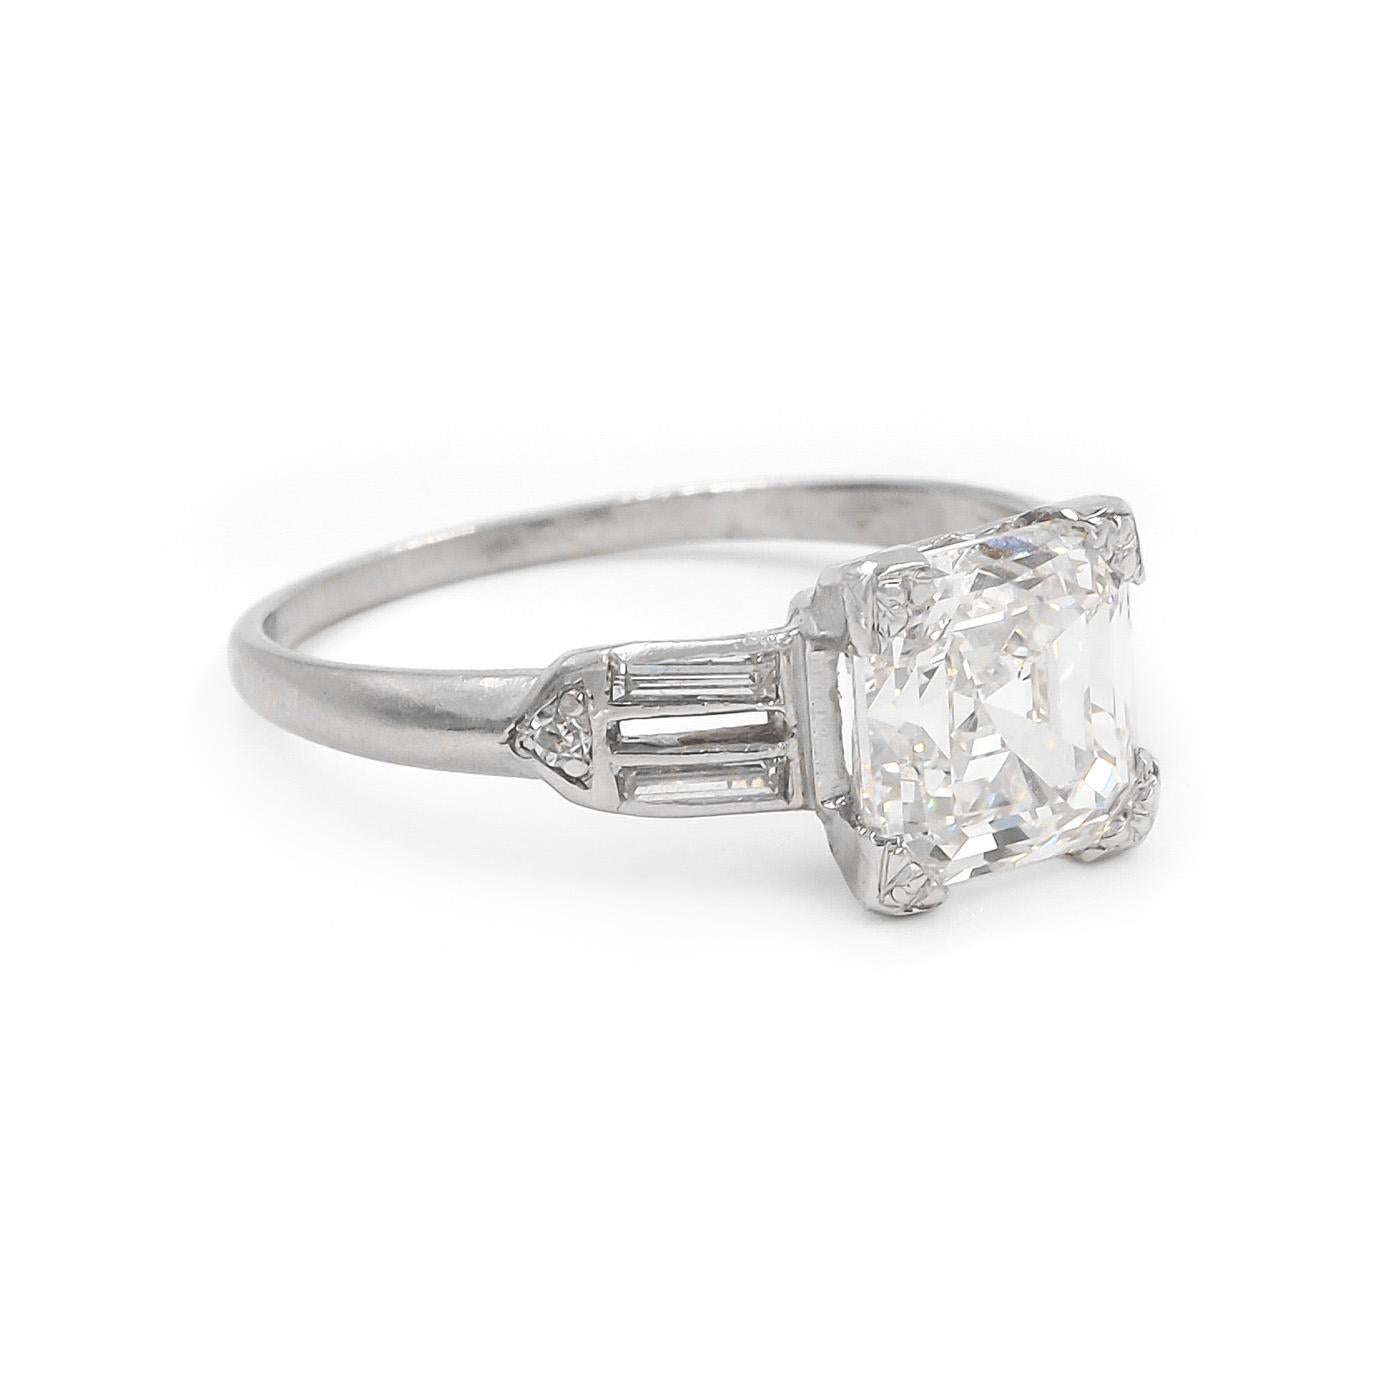 Art Deco era 2.01 Carat Asscher Cut Diamond Engagement Ring composed of platinum. Featuring a 2.01 carat Asscher Cut diamond, GIA certified G color & SI1 clarity. Set with an additional 4 Baguette Cut diamond on the shoulders, weighing approximately